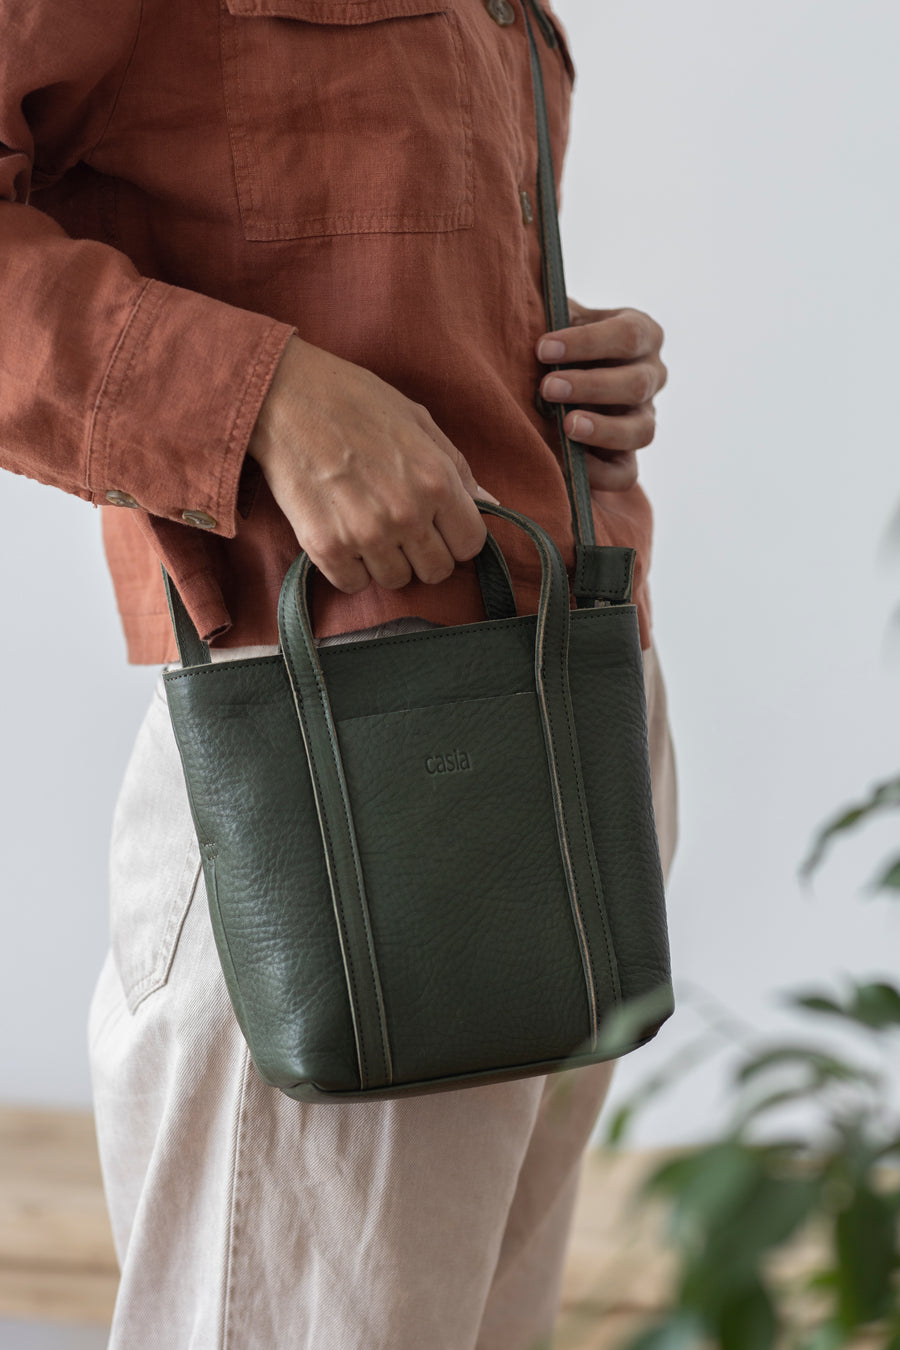 Full grain leather mini tote bag. Vegetable tanned leather shoulder bag. Leather green purse.